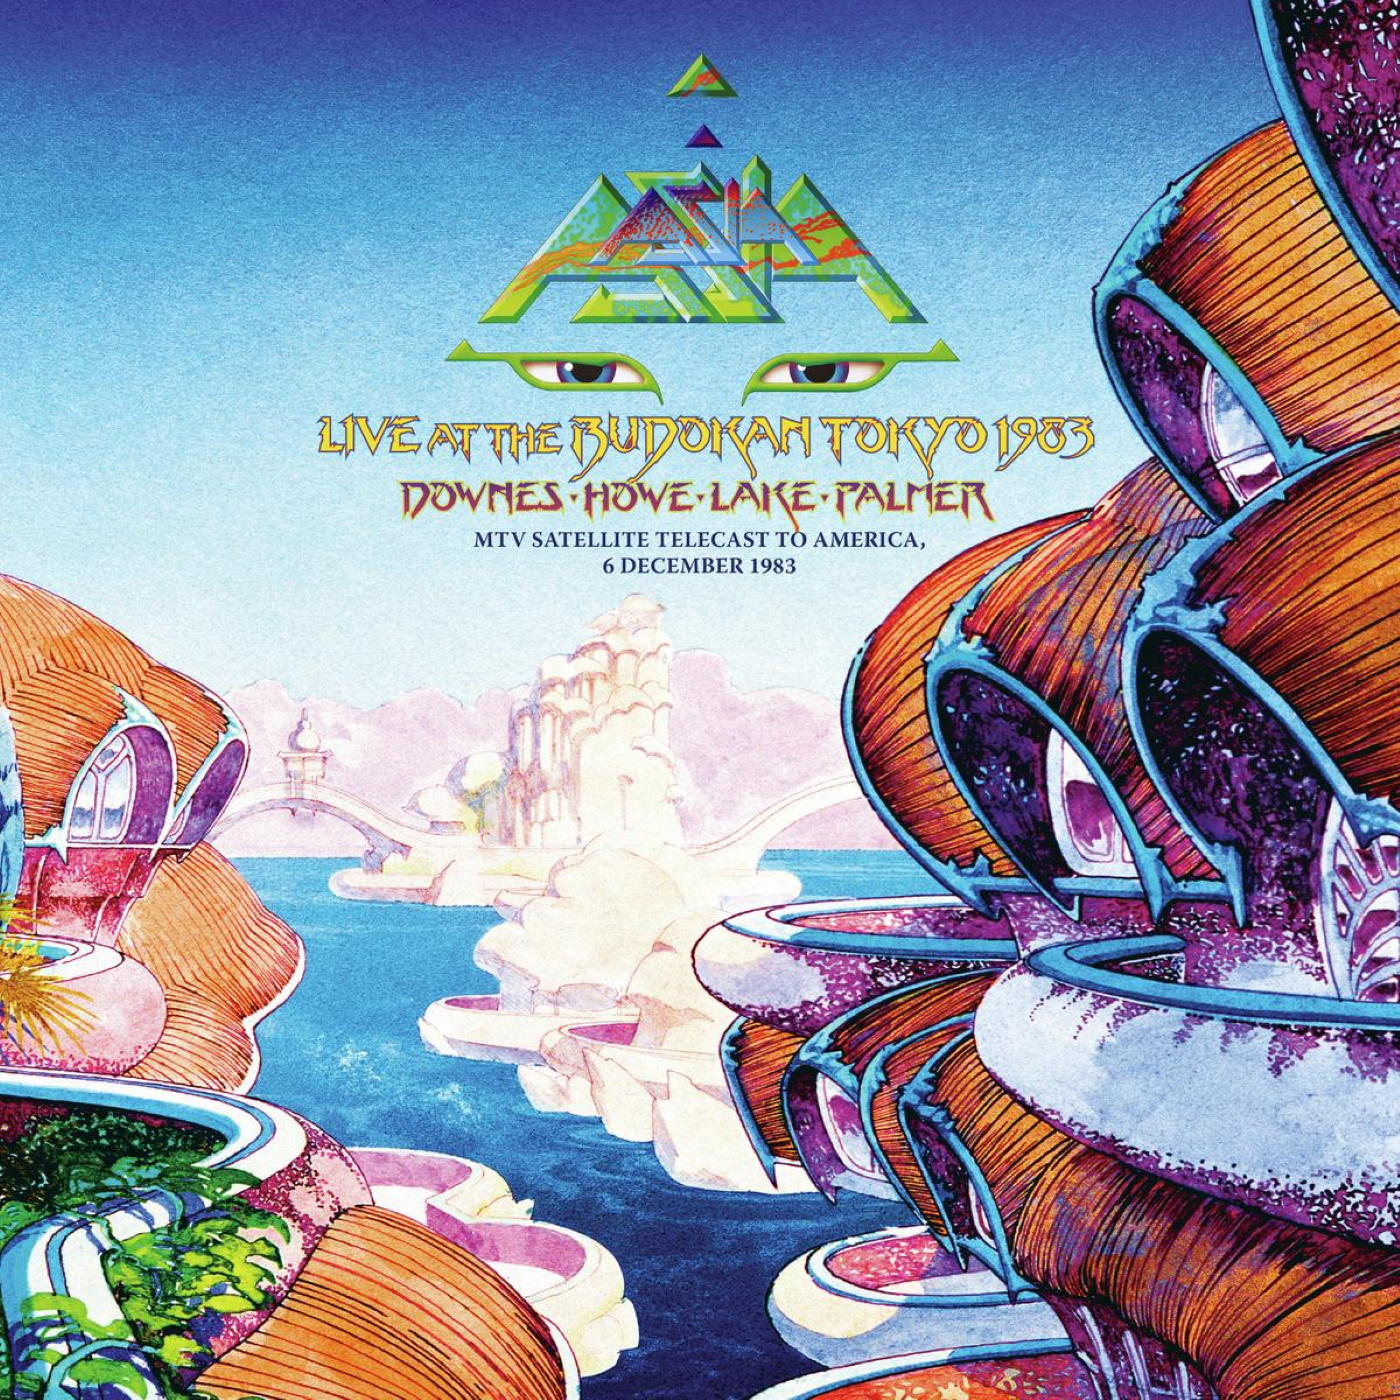 Asia - ASIA IN THE AT TOKYO, (Blu-ray) LIVE 1983 - - BUDOKAN, ASIA